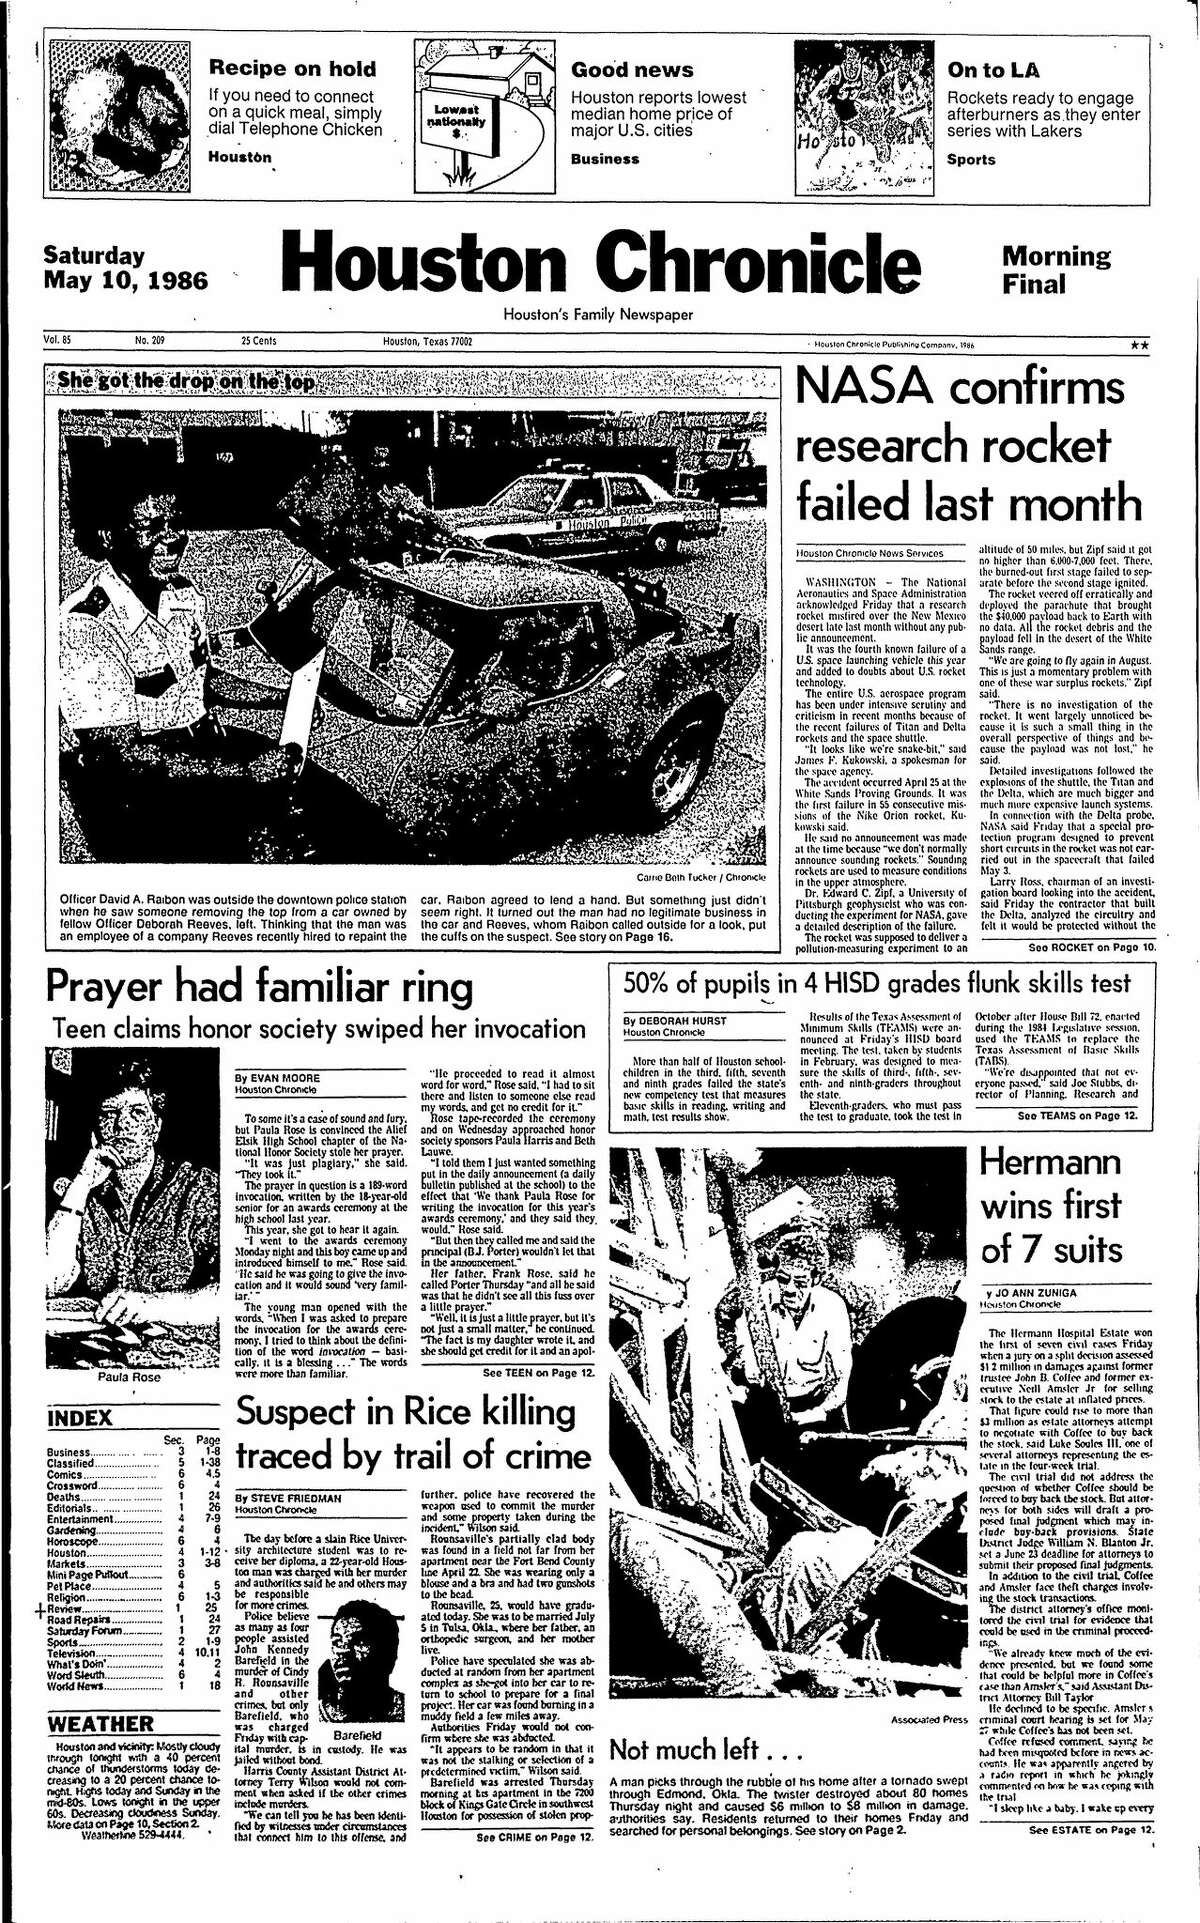 Houston Chronicle front page for May 10, 1986.